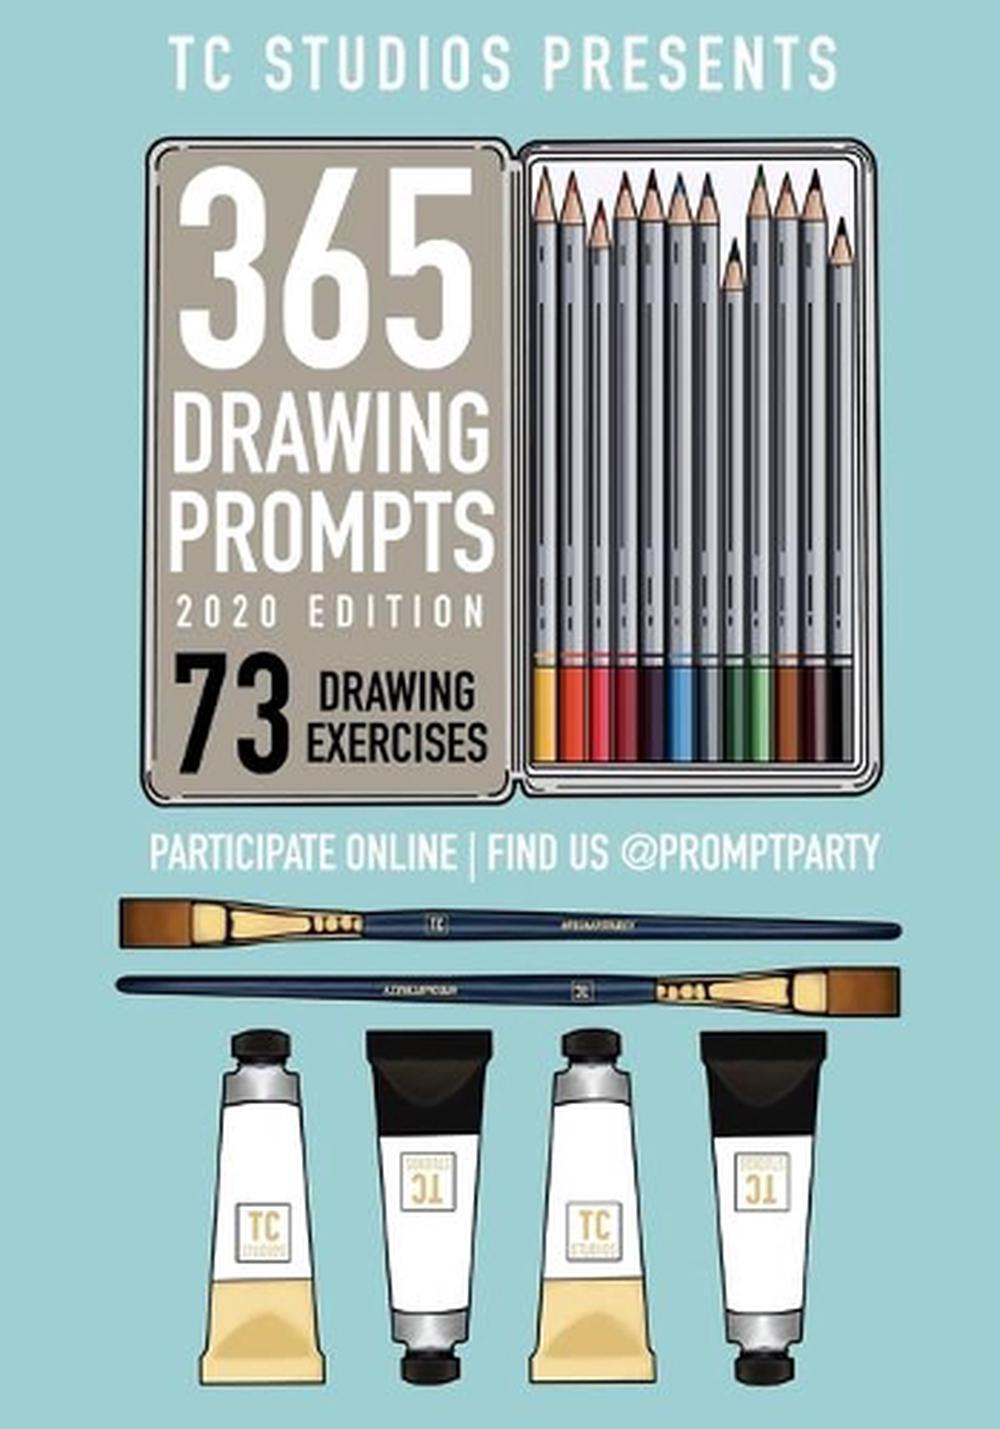 365 Drawing Prompts 2020 Edition by Jaz Johnson (English) Paperback